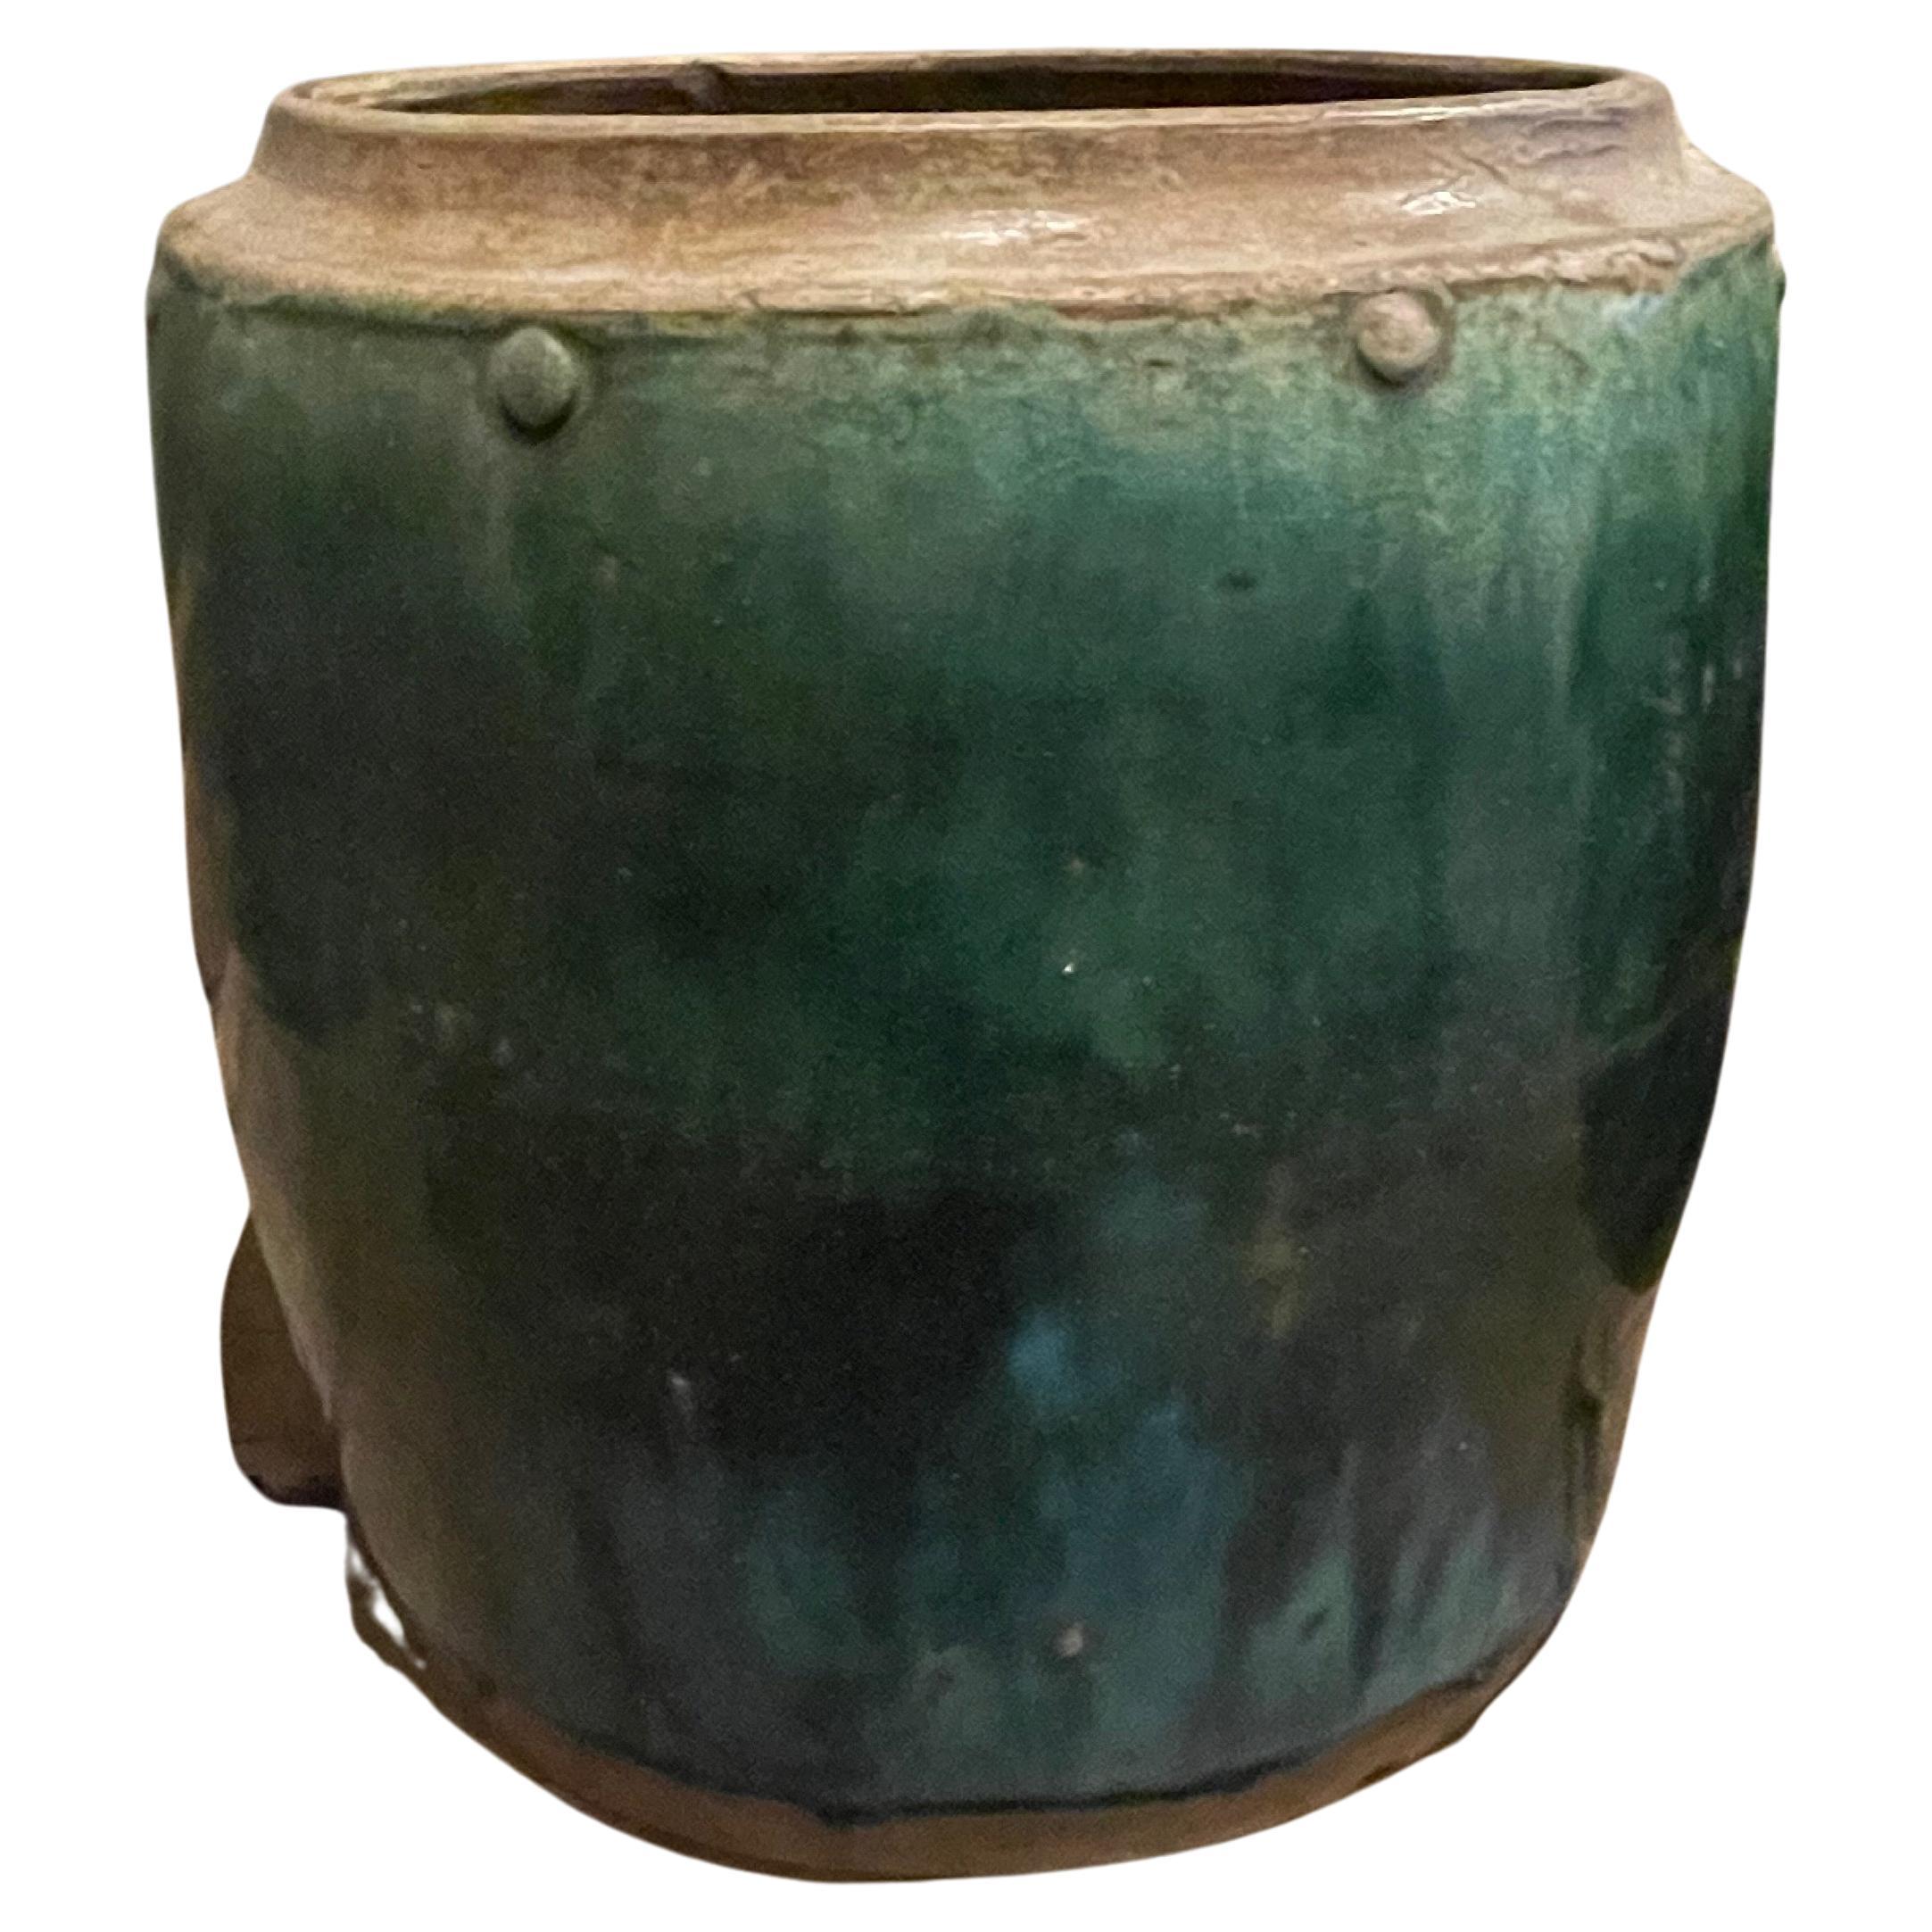 https://a.1stdibscdn.com/green-and-turquoise-glaze-ginger-pot-borneo-18th-century-for-sale/f_8112/f_337767721681326372914/f_33776772_1681326373811_bg_processed.jpg